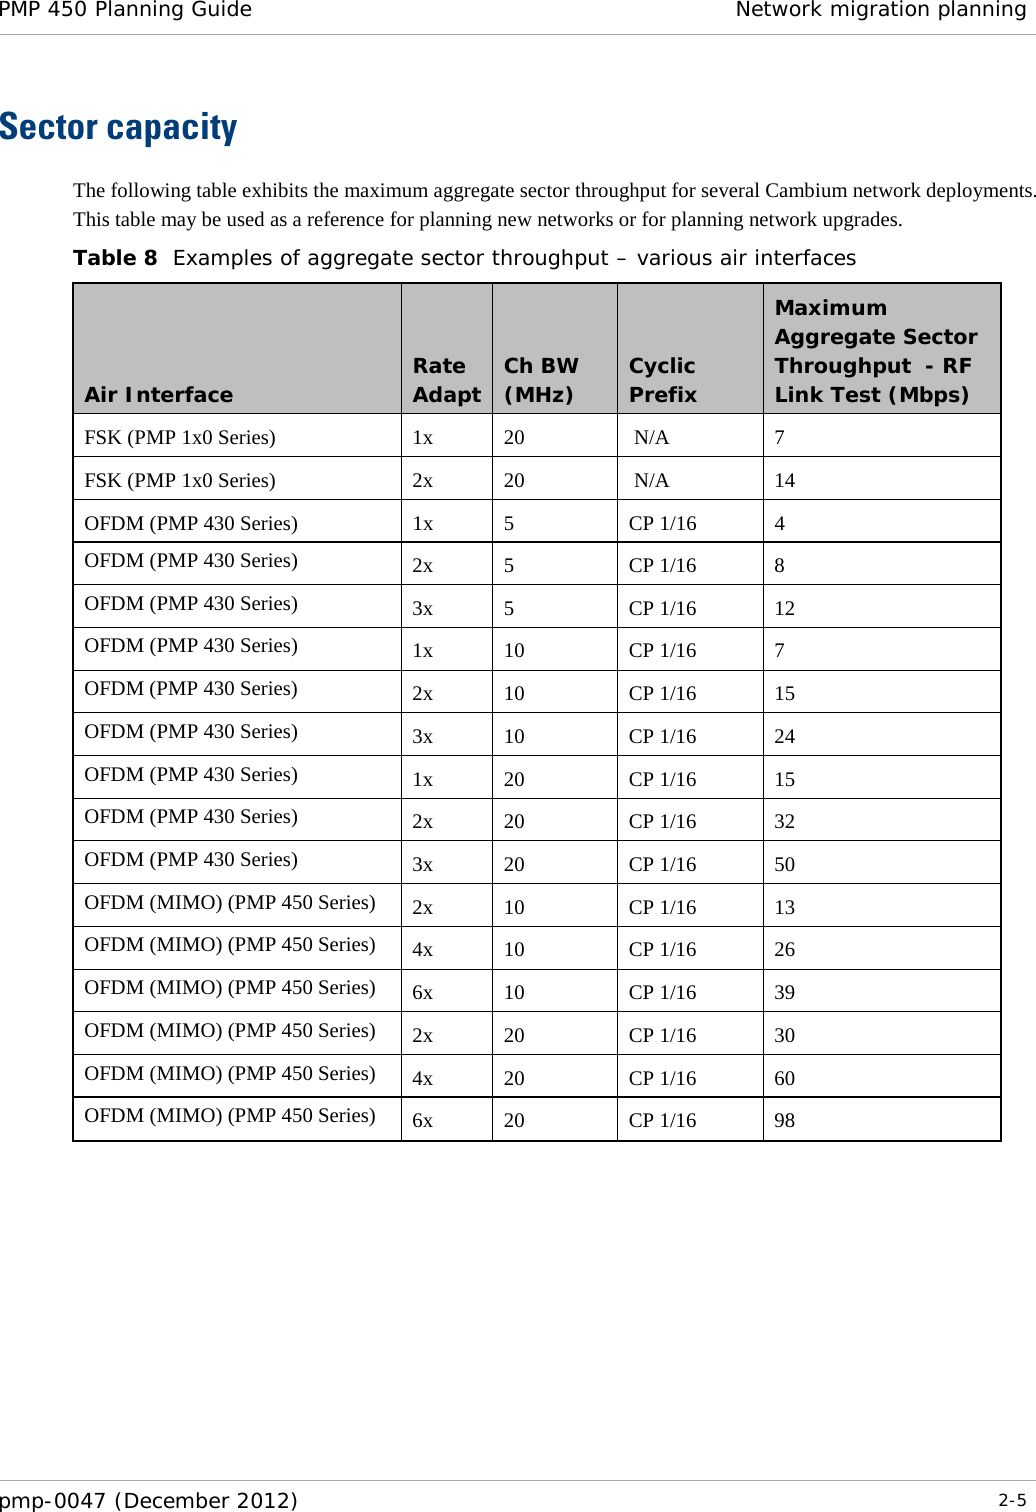 PMP 450 Planning Guide Network migration planning  pmp-0047 (December 2012)  2-5  Sector capacity The following table exhibits the maximum aggregate sector throughput for several Cambium network deployments.  This table may be used as a reference for planning new networks or for planning network upgrades. Table 8  Examples of aggregate sector throughput – various air interfaces Air Interface Rate Adapt Ch BW   (MHz) Cyclic Prefix Maximum Aggregate Sector Throughput  - RF Link Test (Mbps) FSK (PMP 1x0 Series) 1x 20   N/A  7 FSK (PMP 1x0 Series) 2x 20   N/A 14 OFDM (PMP 430 Series) 1x  5  CP 1/16  4 OFDM (PMP 430 Series) 2x  5  CP 1/16  8 OFDM (PMP 430 Series) 3x  5  CP 1/16 12 OFDM (PMP 430 Series) 1x 10 CP 1/16  7 OFDM (PMP 430 Series) 2x 10 CP 1/16 15 OFDM (PMP 430 Series) 3x 10 CP 1/16 24 OFDM (PMP 430 Series) 1x 20 CP 1/16 15 OFDM (PMP 430 Series) 2x 20 CP 1/16 32 OFDM (PMP 430 Series) 3x 20 CP 1/16 50 OFDM (MIMO) (PMP 450 Series) 2x 10 CP 1/16 13 OFDM (MIMO) (PMP 450 Series) 4x 10 CP 1/16 26 OFDM (MIMO) (PMP 450 Series) 6x 10 CP 1/16 39 OFDM (MIMO) (PMP 450 Series) 2x 20 CP 1/16 30 OFDM (MIMO) (PMP 450 Series) 4x 20 CP 1/16 60 OFDM (MIMO) (PMP 450 Series) 6x 20 CP 1/16 98   